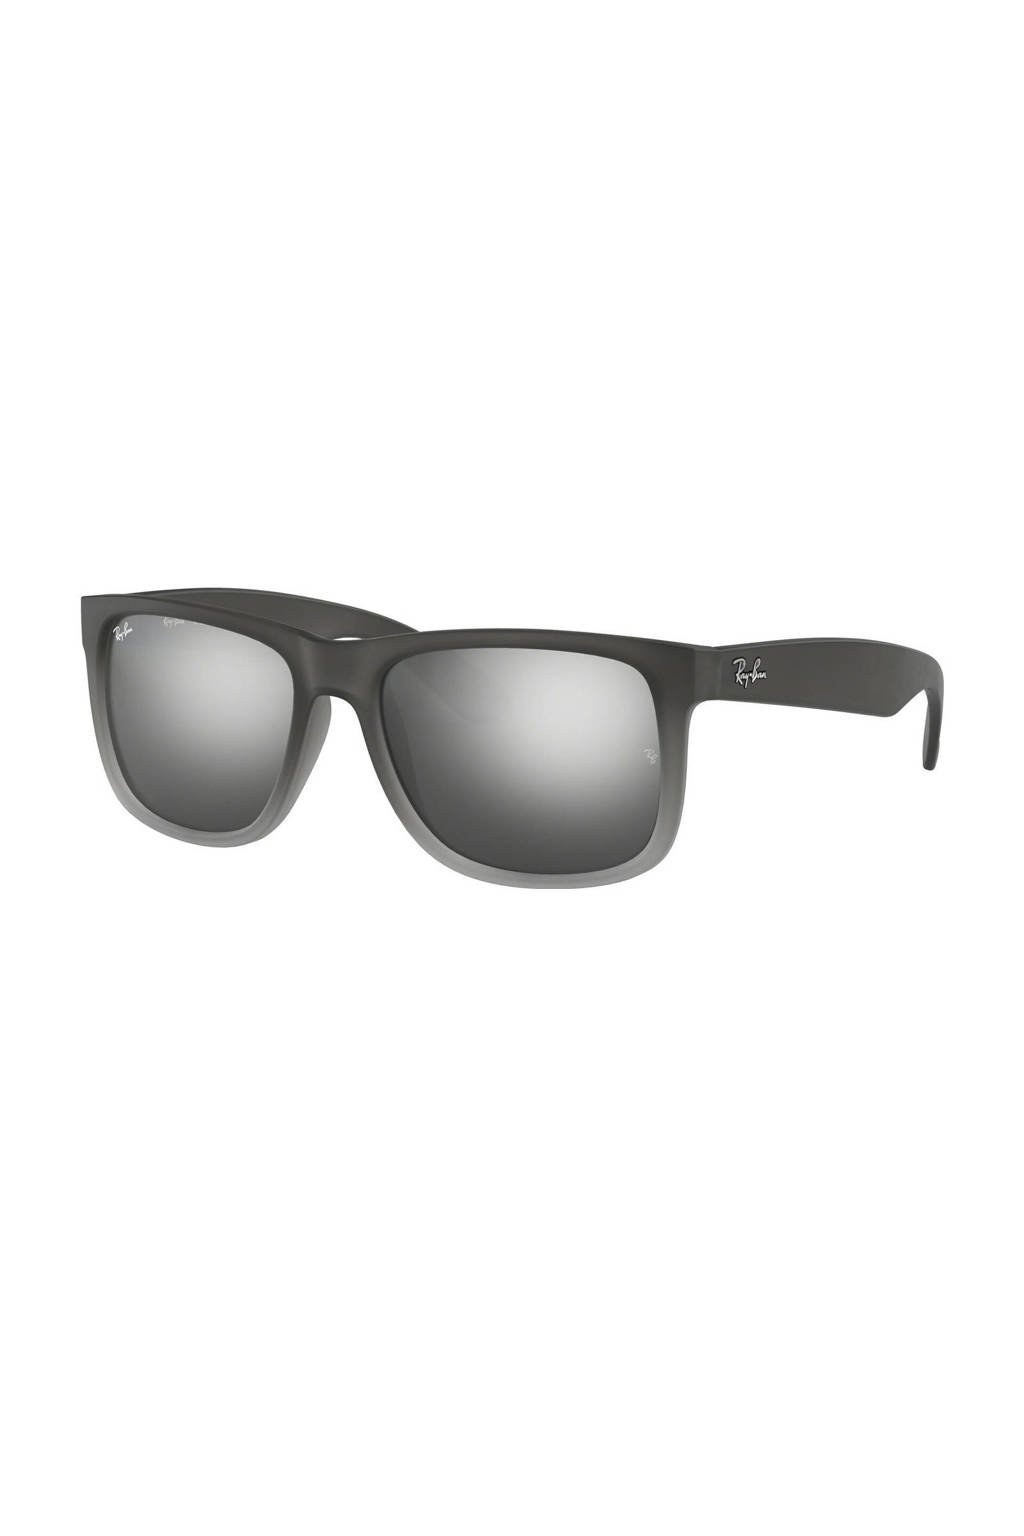 Ray-Ban zonnebril 0RB4165 antraciet